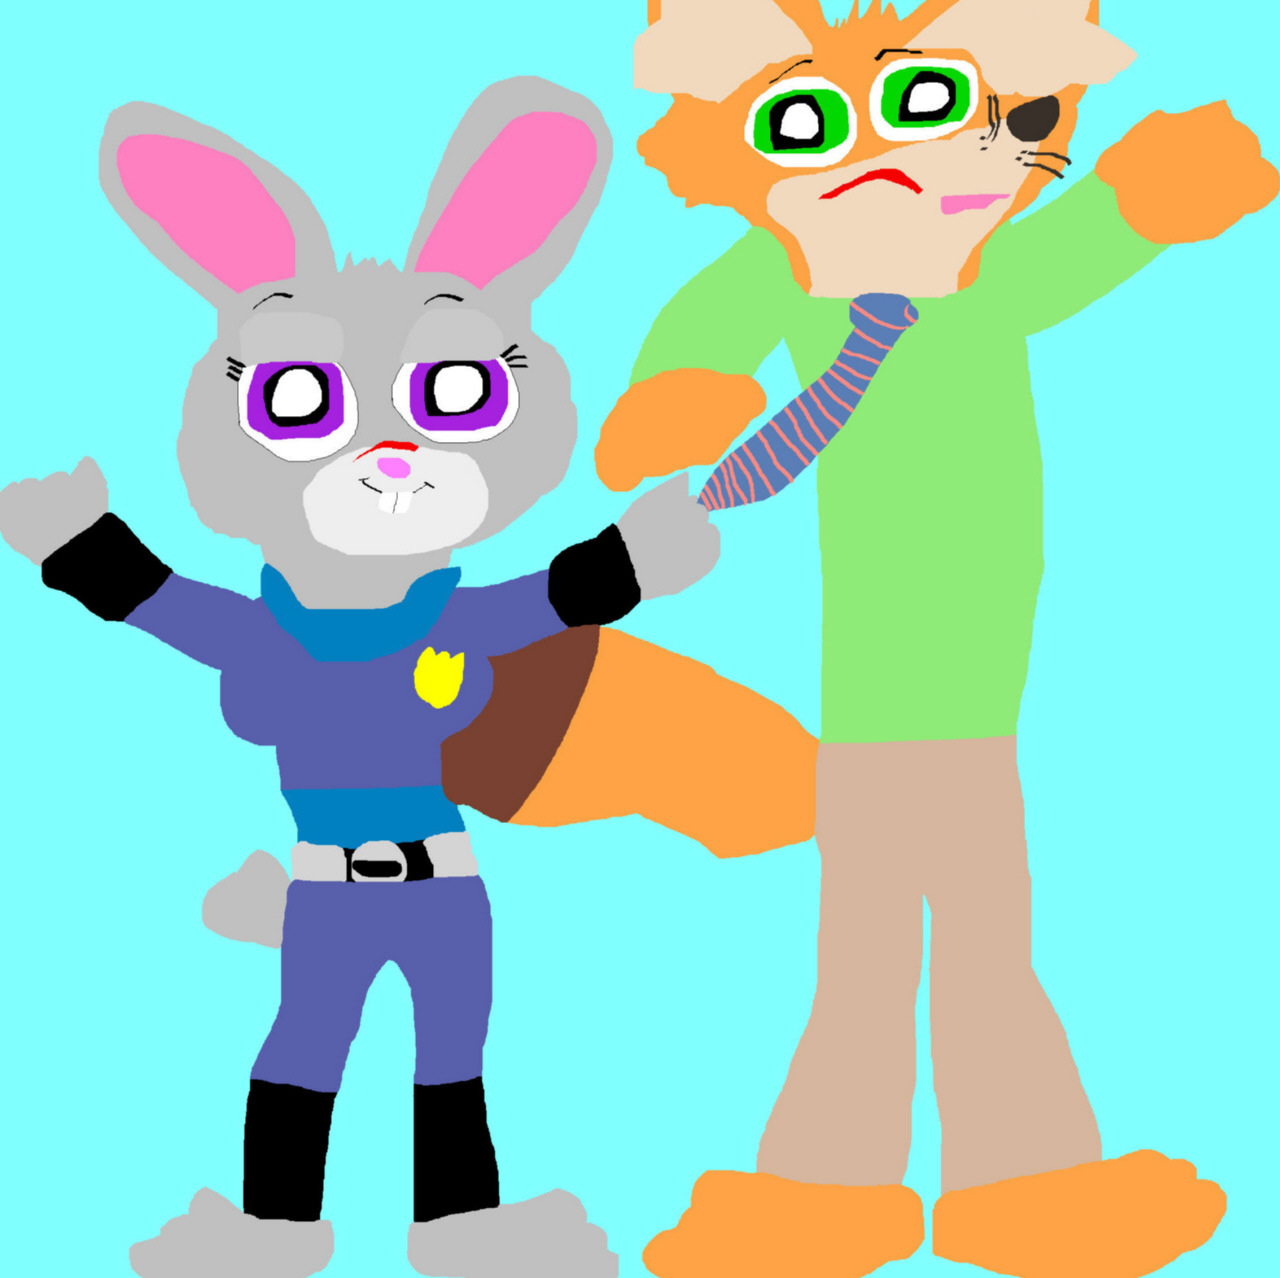 Judy Hopps The Cute Bunny Cop And Nick Wilde Added MS Paint by Falconlobo